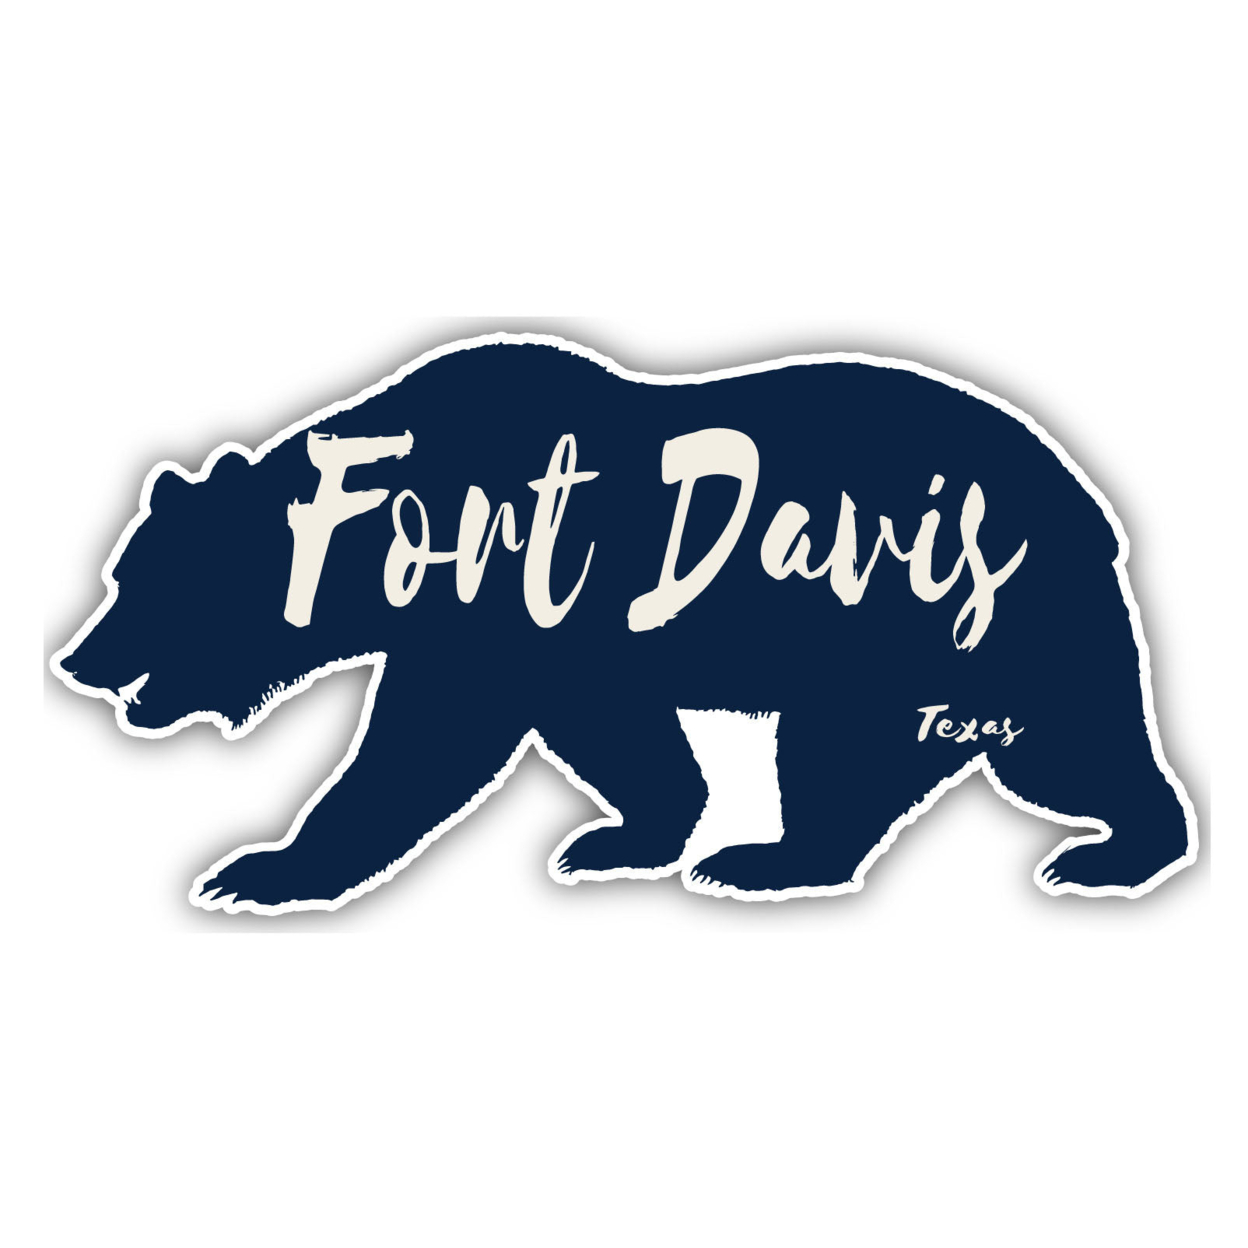 Fort Davis Texas Souvenir Decorative Stickers (Choose Theme And Size) - 4-Pack, 4-Inch, Adventures Awaits